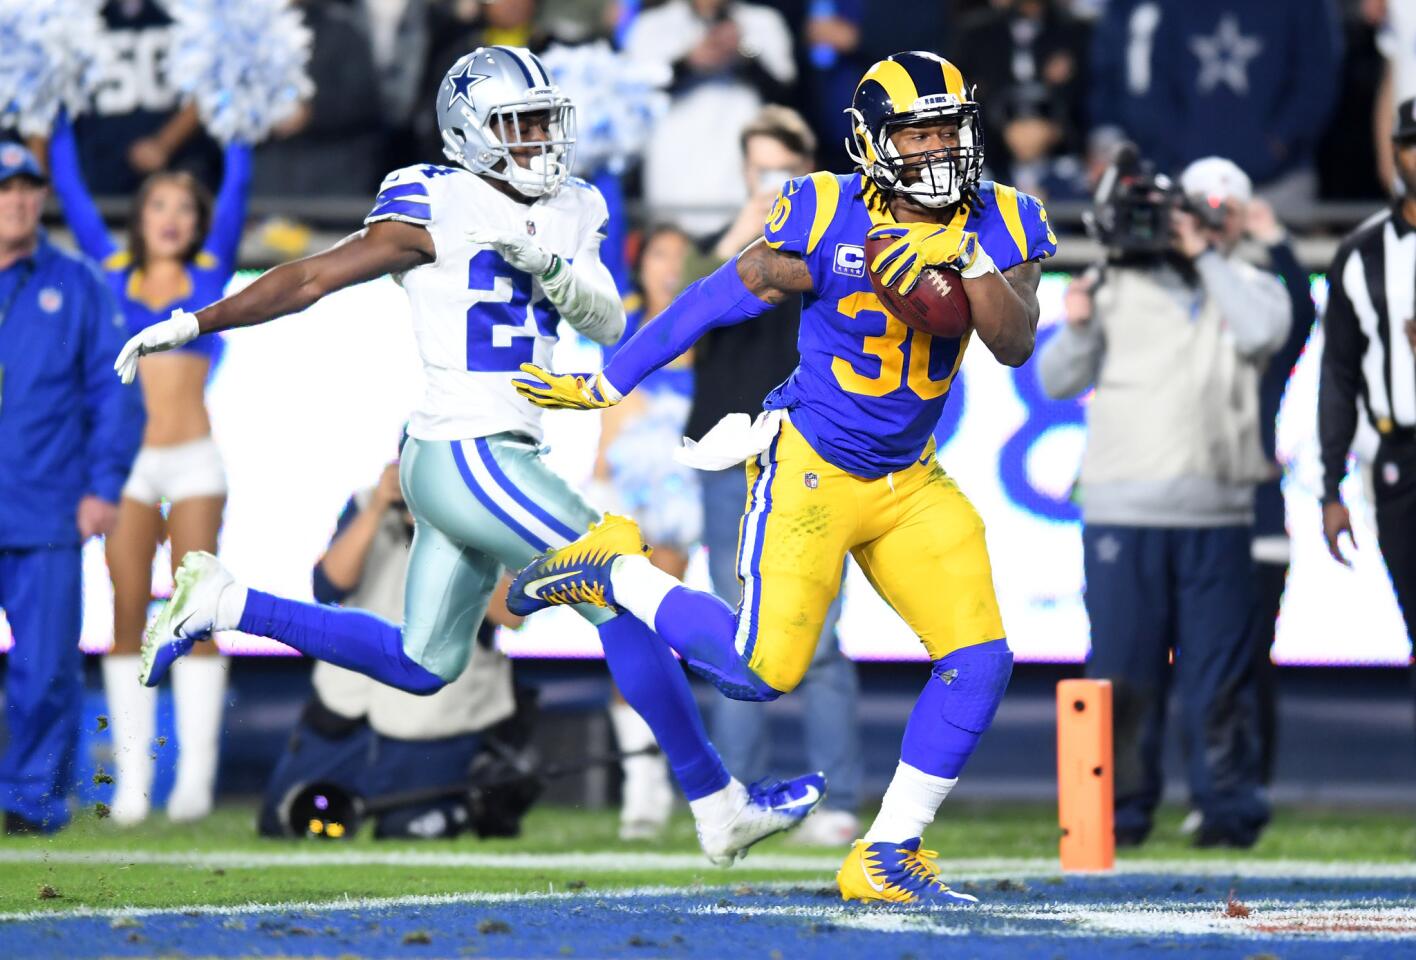 Rams running back Todd Gurley beats Cowbows cornerback Chidobe Awuzie to finish off his scoring run during the second quarter.